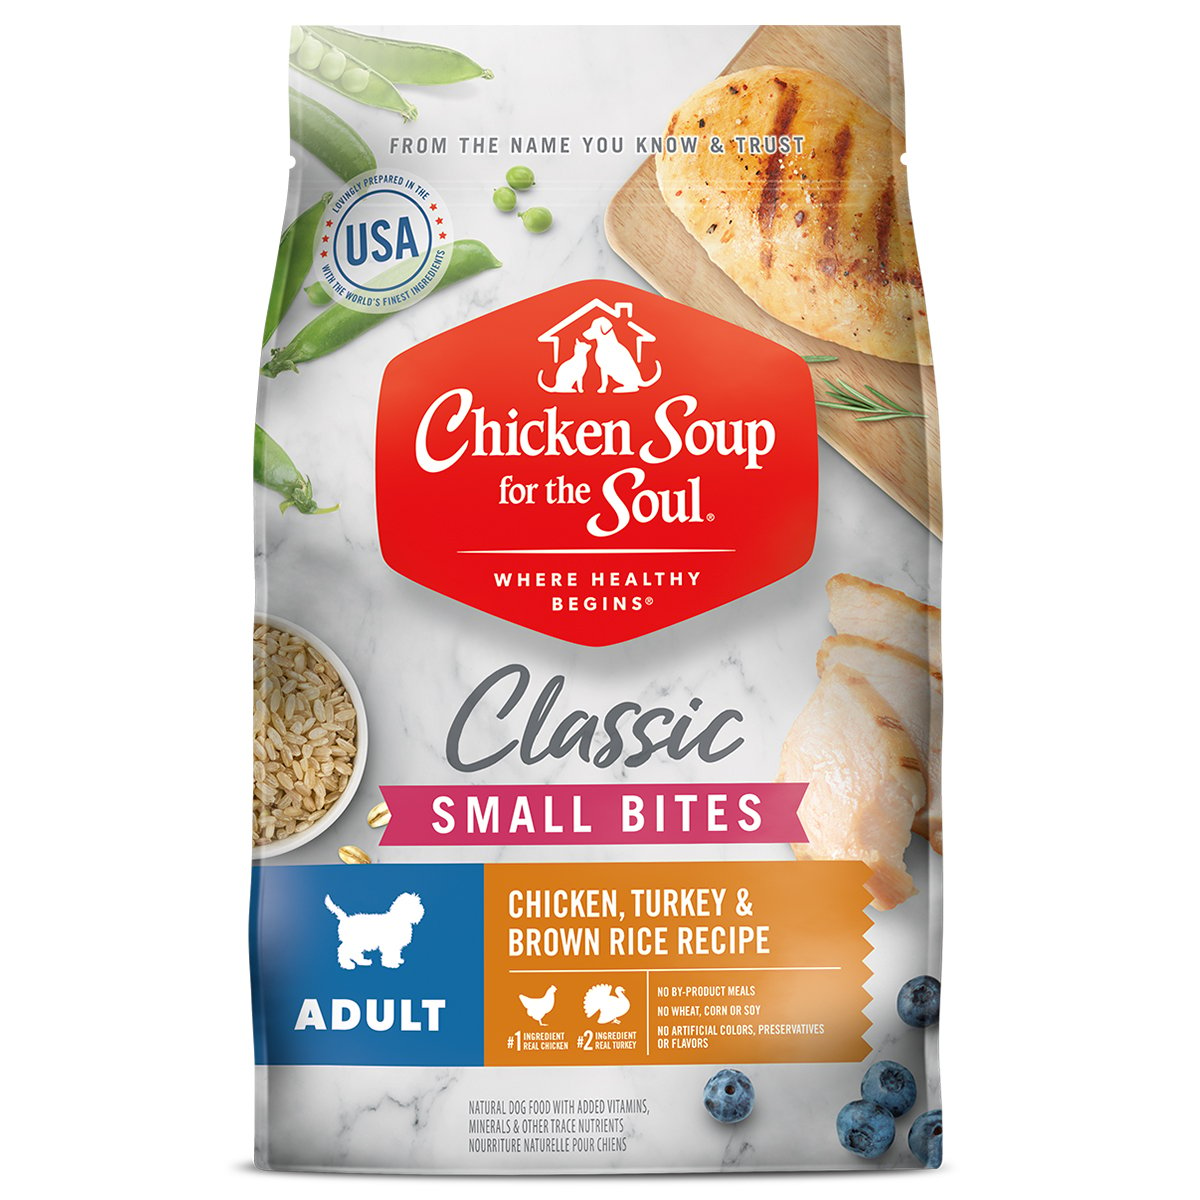 Chicken Soup for the Soul Small Bites - Chicken, Turkey & Brown Rice Recipe Dry Dog Food, 4.5 lb. Bag